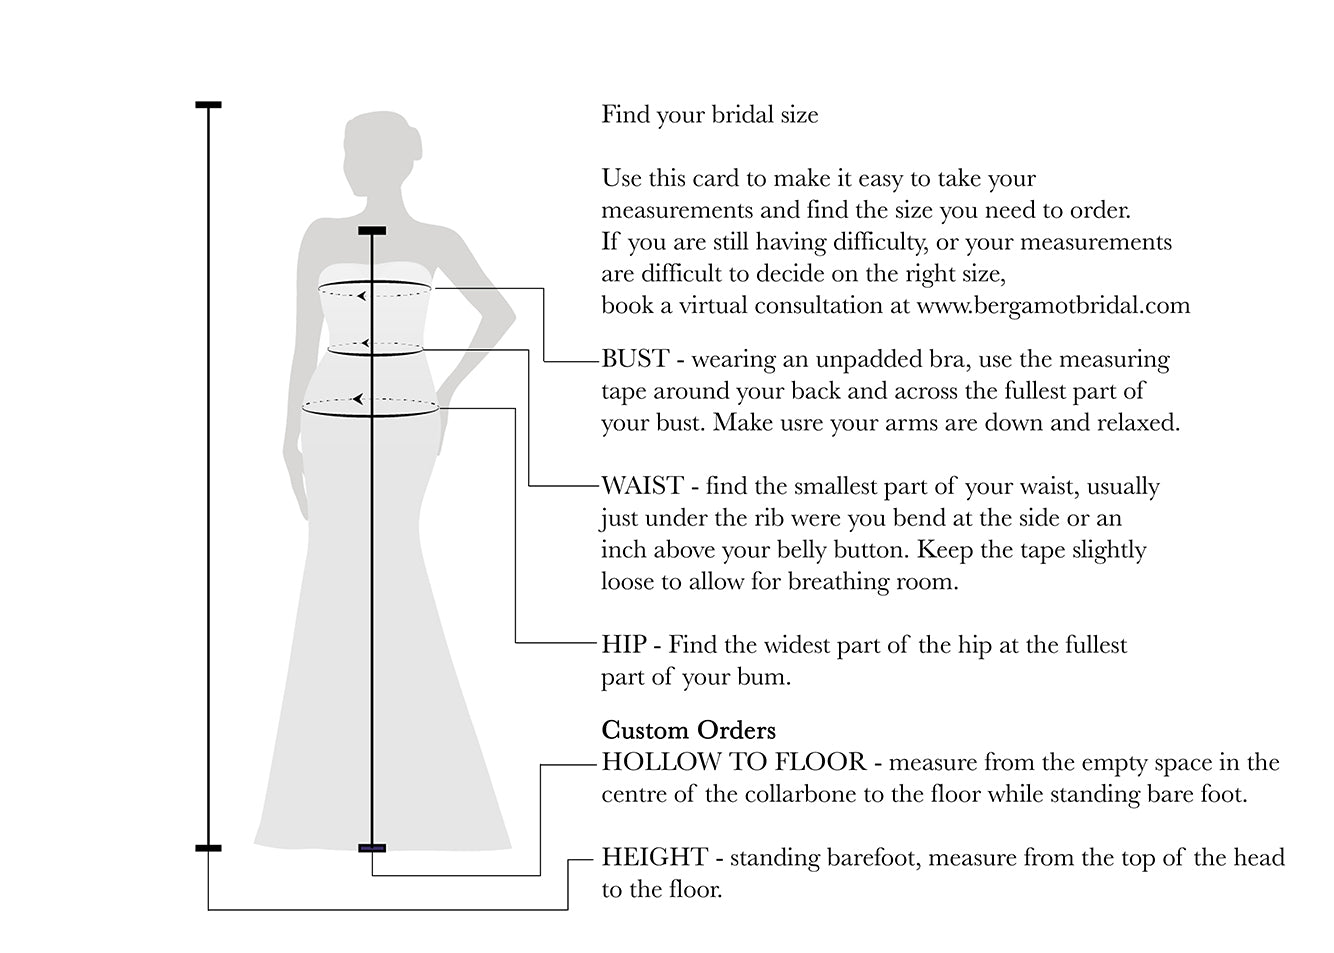 A diagram showing the measurements of an Illusion High Neck Bridal Gown with Lovely 3D Floral Lace by Bergamot Bridal.